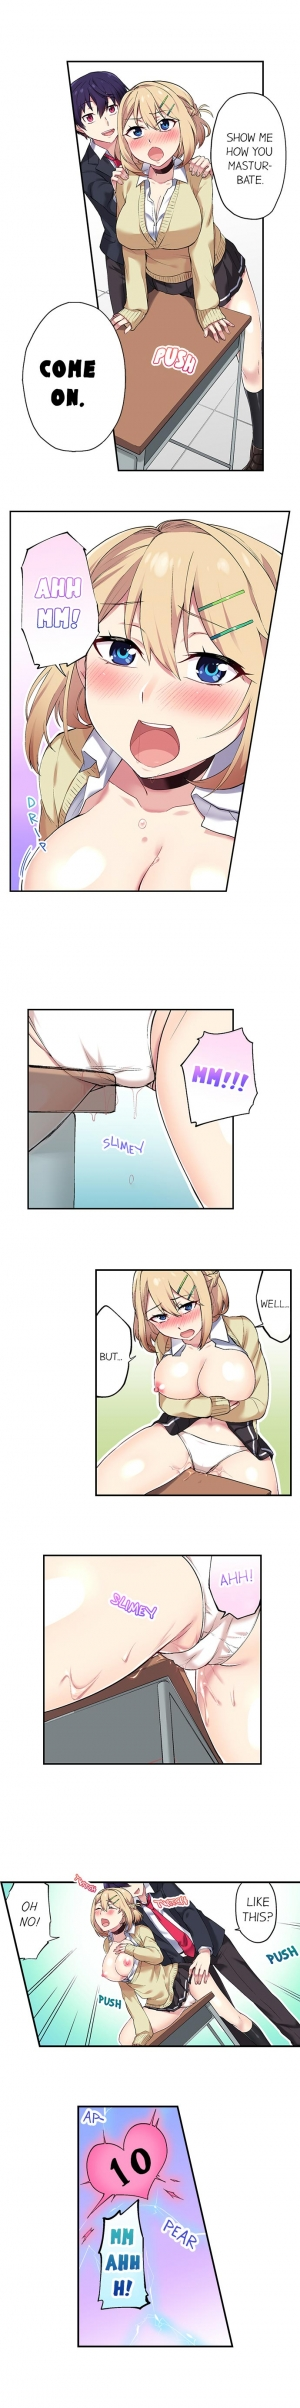  Committee Chairman, Didn't You Just Masturbate In the Bathroom? I Can See the Number of Times People Orgasm [English](Ongoing) - Page 55